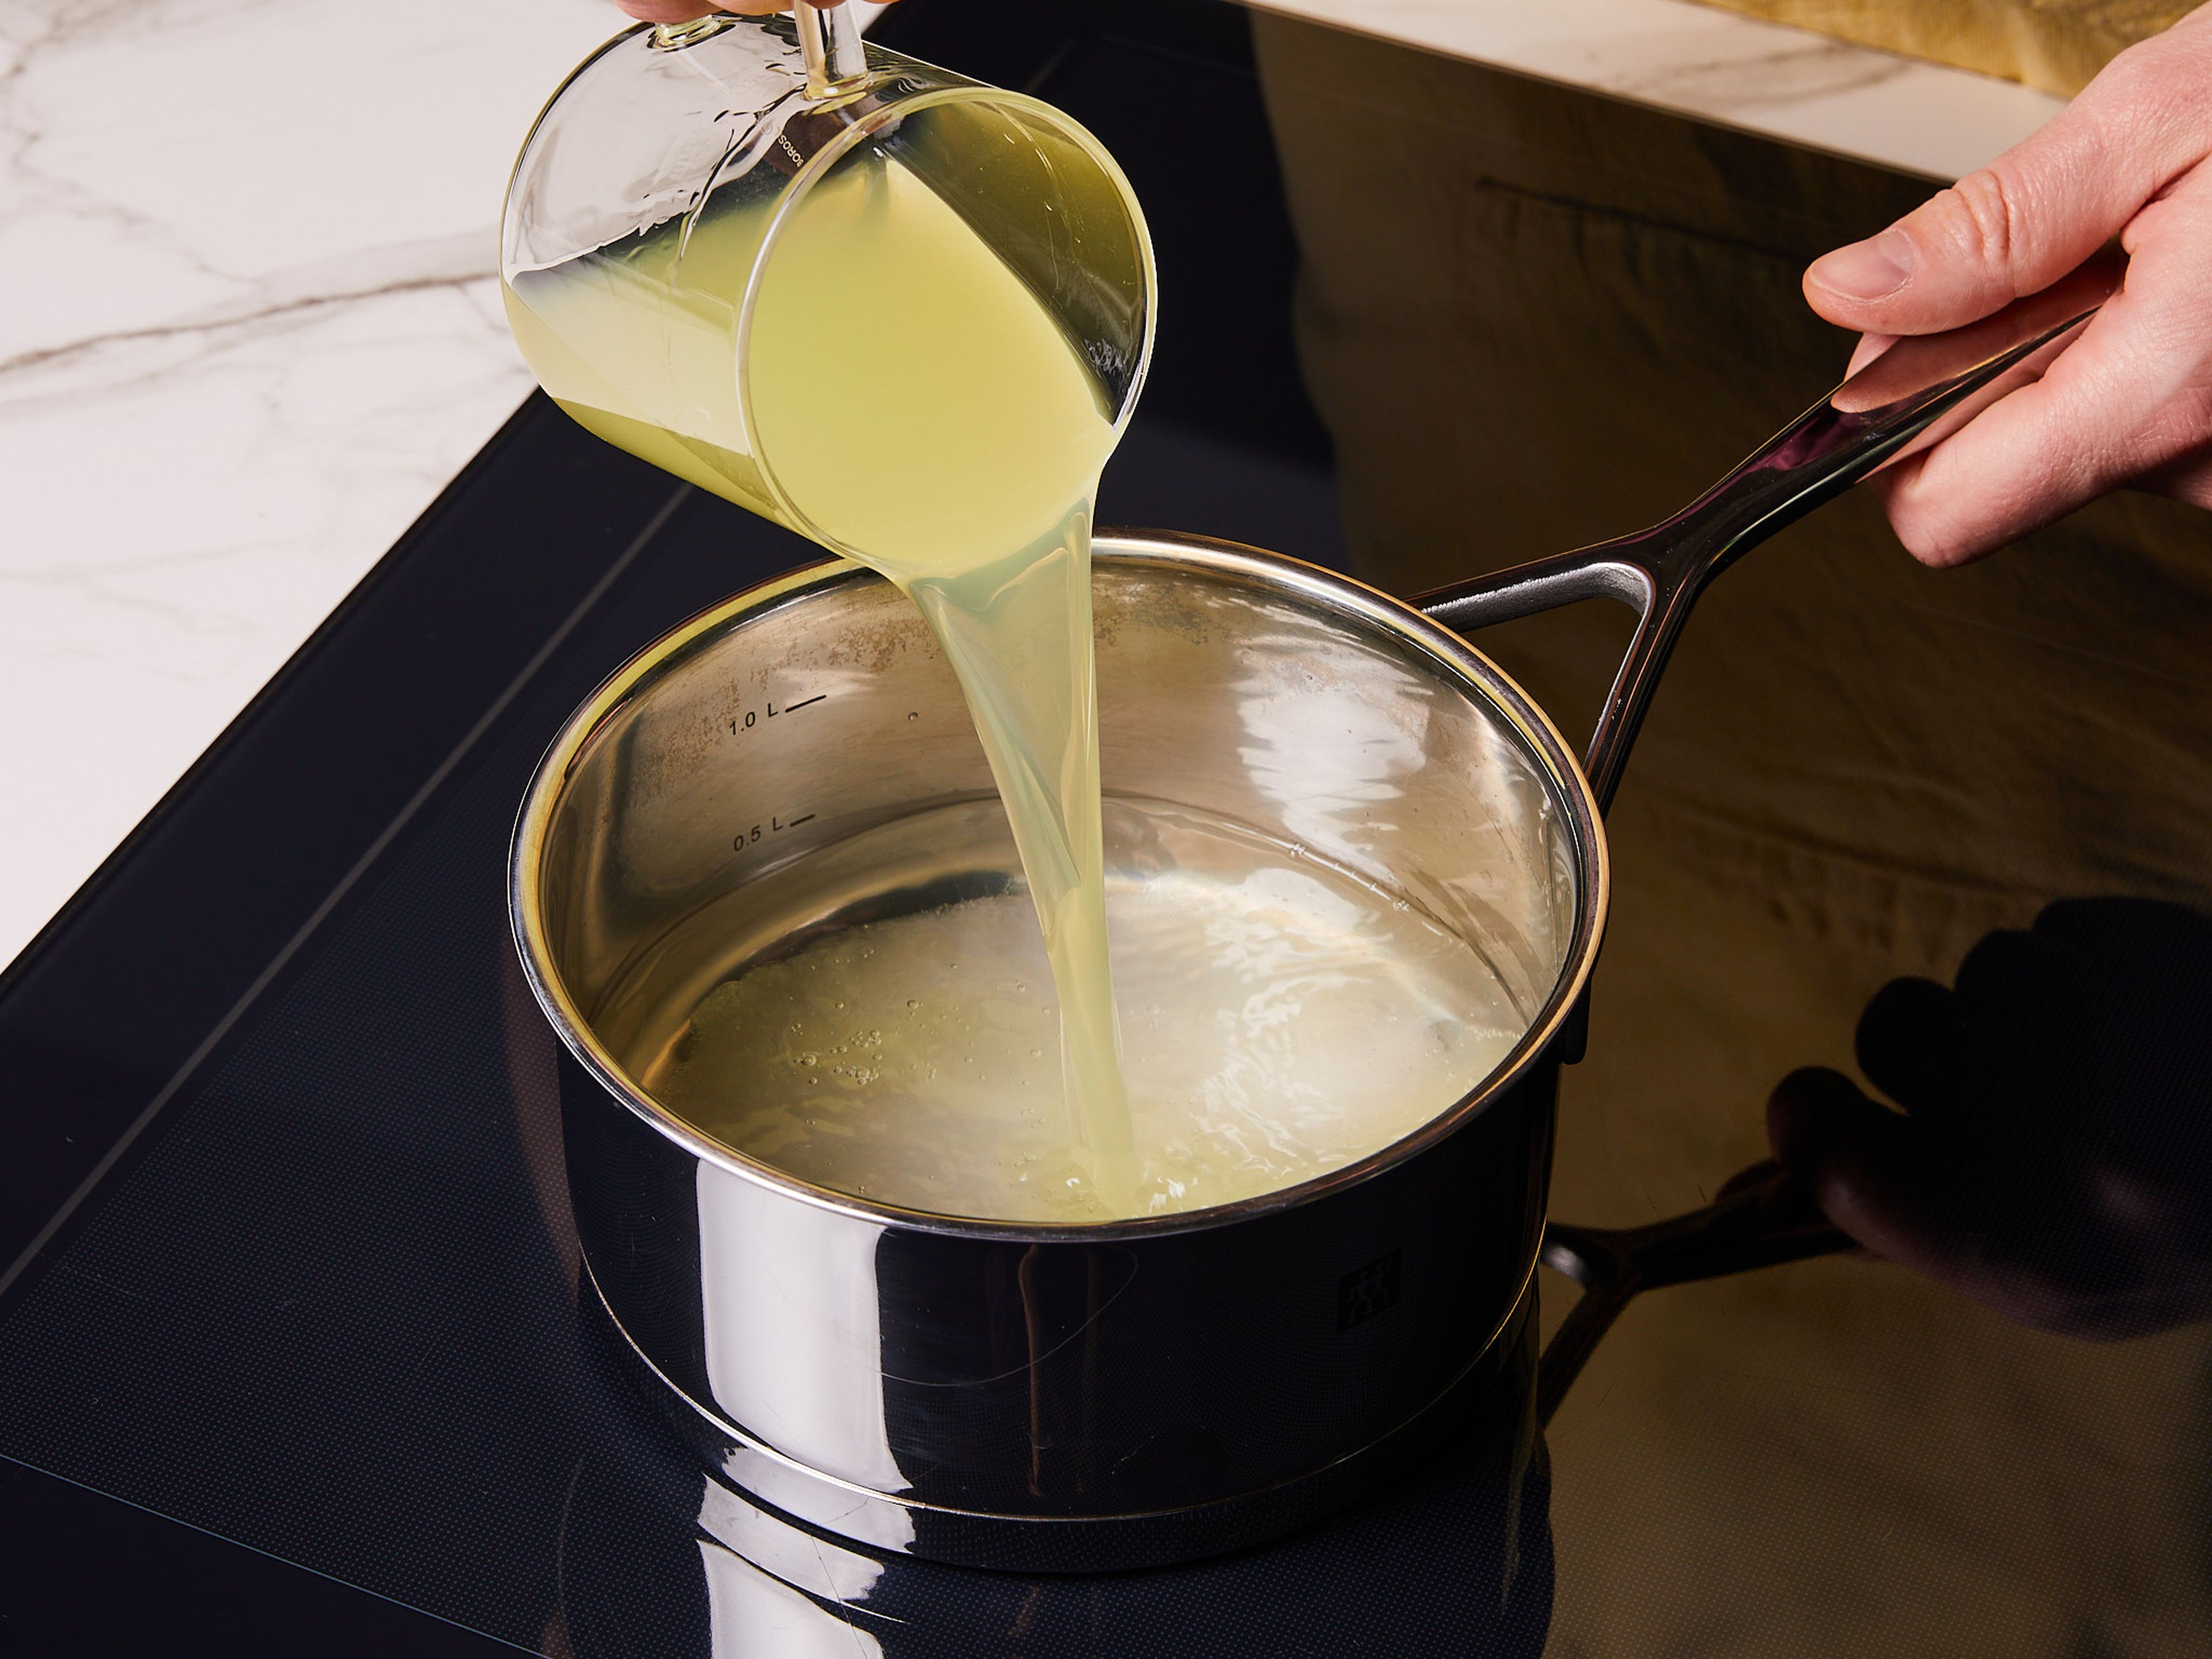 Start with the syrup and bring limoncello, sugar, and water to a boil in a saucepan. Let it simmer gently until the sugar dissolves and the alcohol evaporates for approx. 2 min. Transfer to a bowl and set aside.